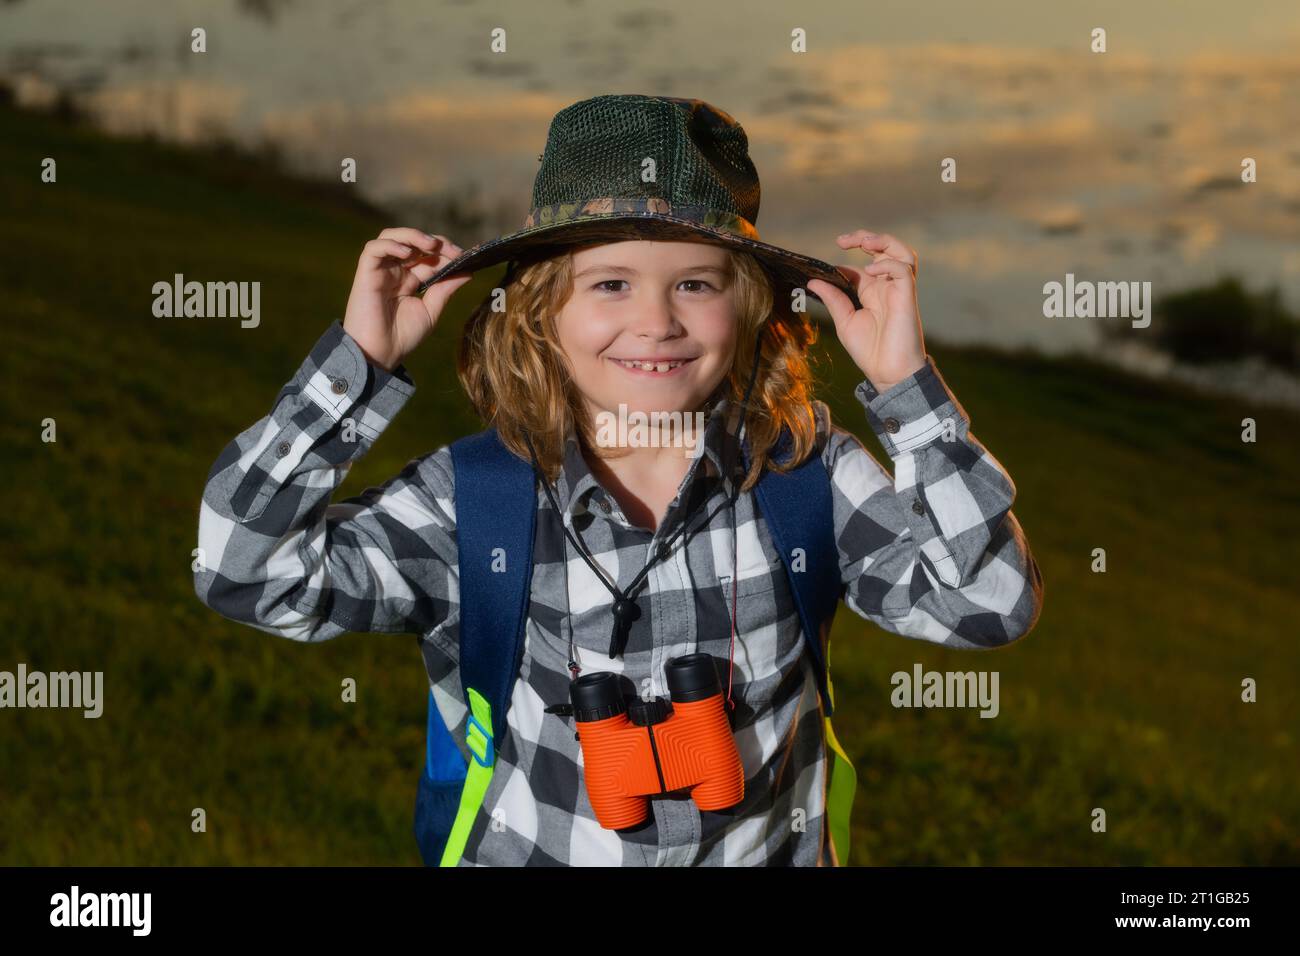 Child tourists with backpacks. Adventure, travel, and tourism concept. Kid walking with backpacks on nature. Little explorer on trip Stock Photo